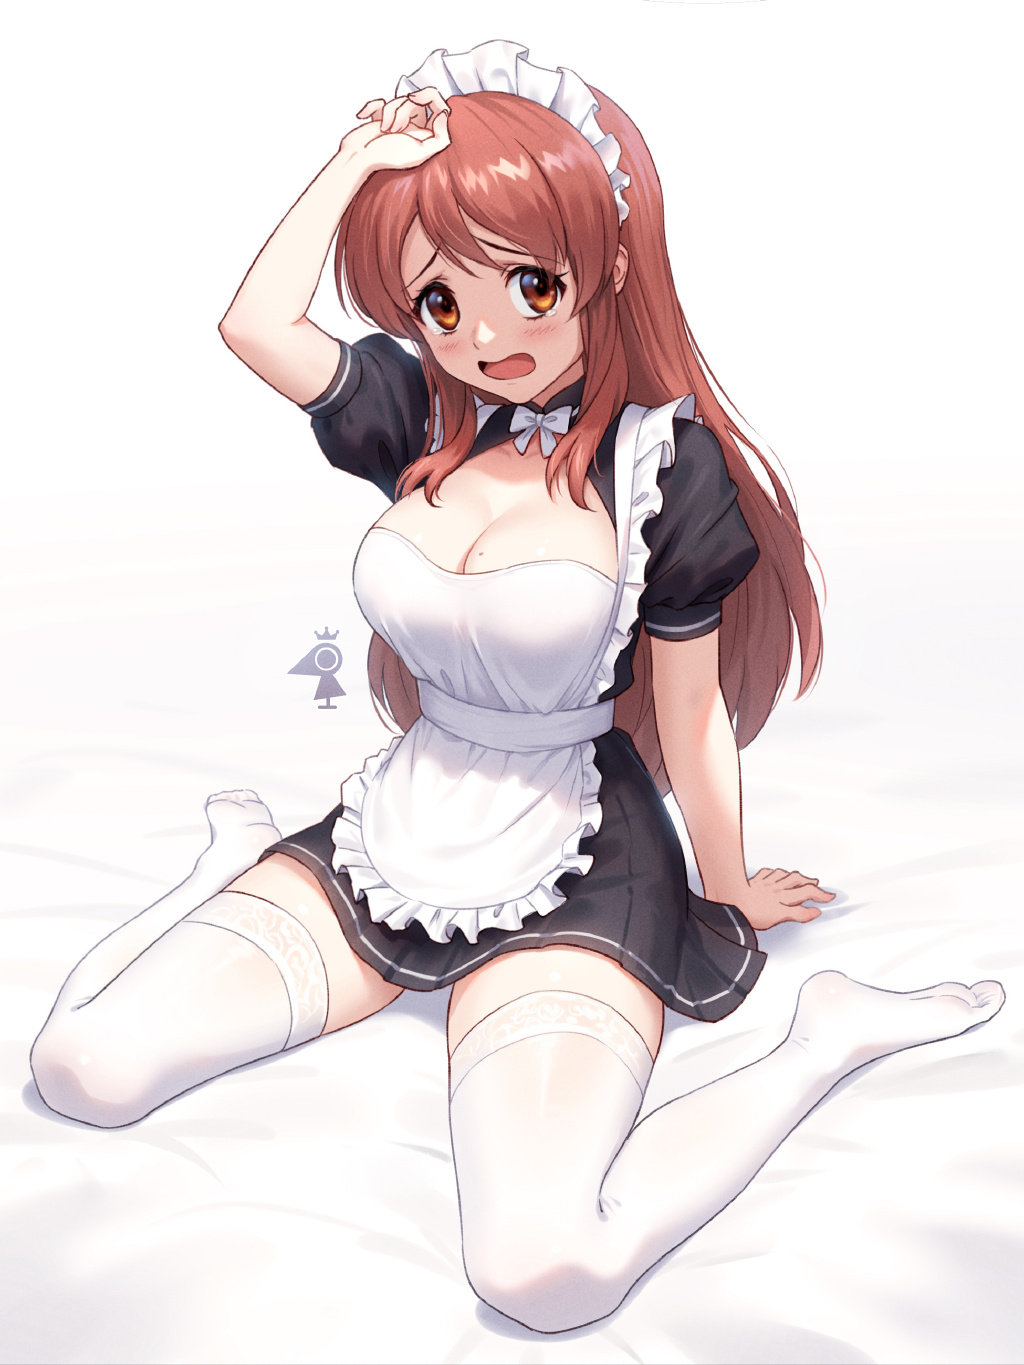 Anime 1024x1365 anime anime girls The Melancholy of Haruhi Suzumiya Asahina Mikuru brunette long hair brown eyes maid outfit thigh-highs cleavage kneeling bright white background whole body spread legs bent legs one arm up big boobs hands on floor simple background maid open mouth wariza